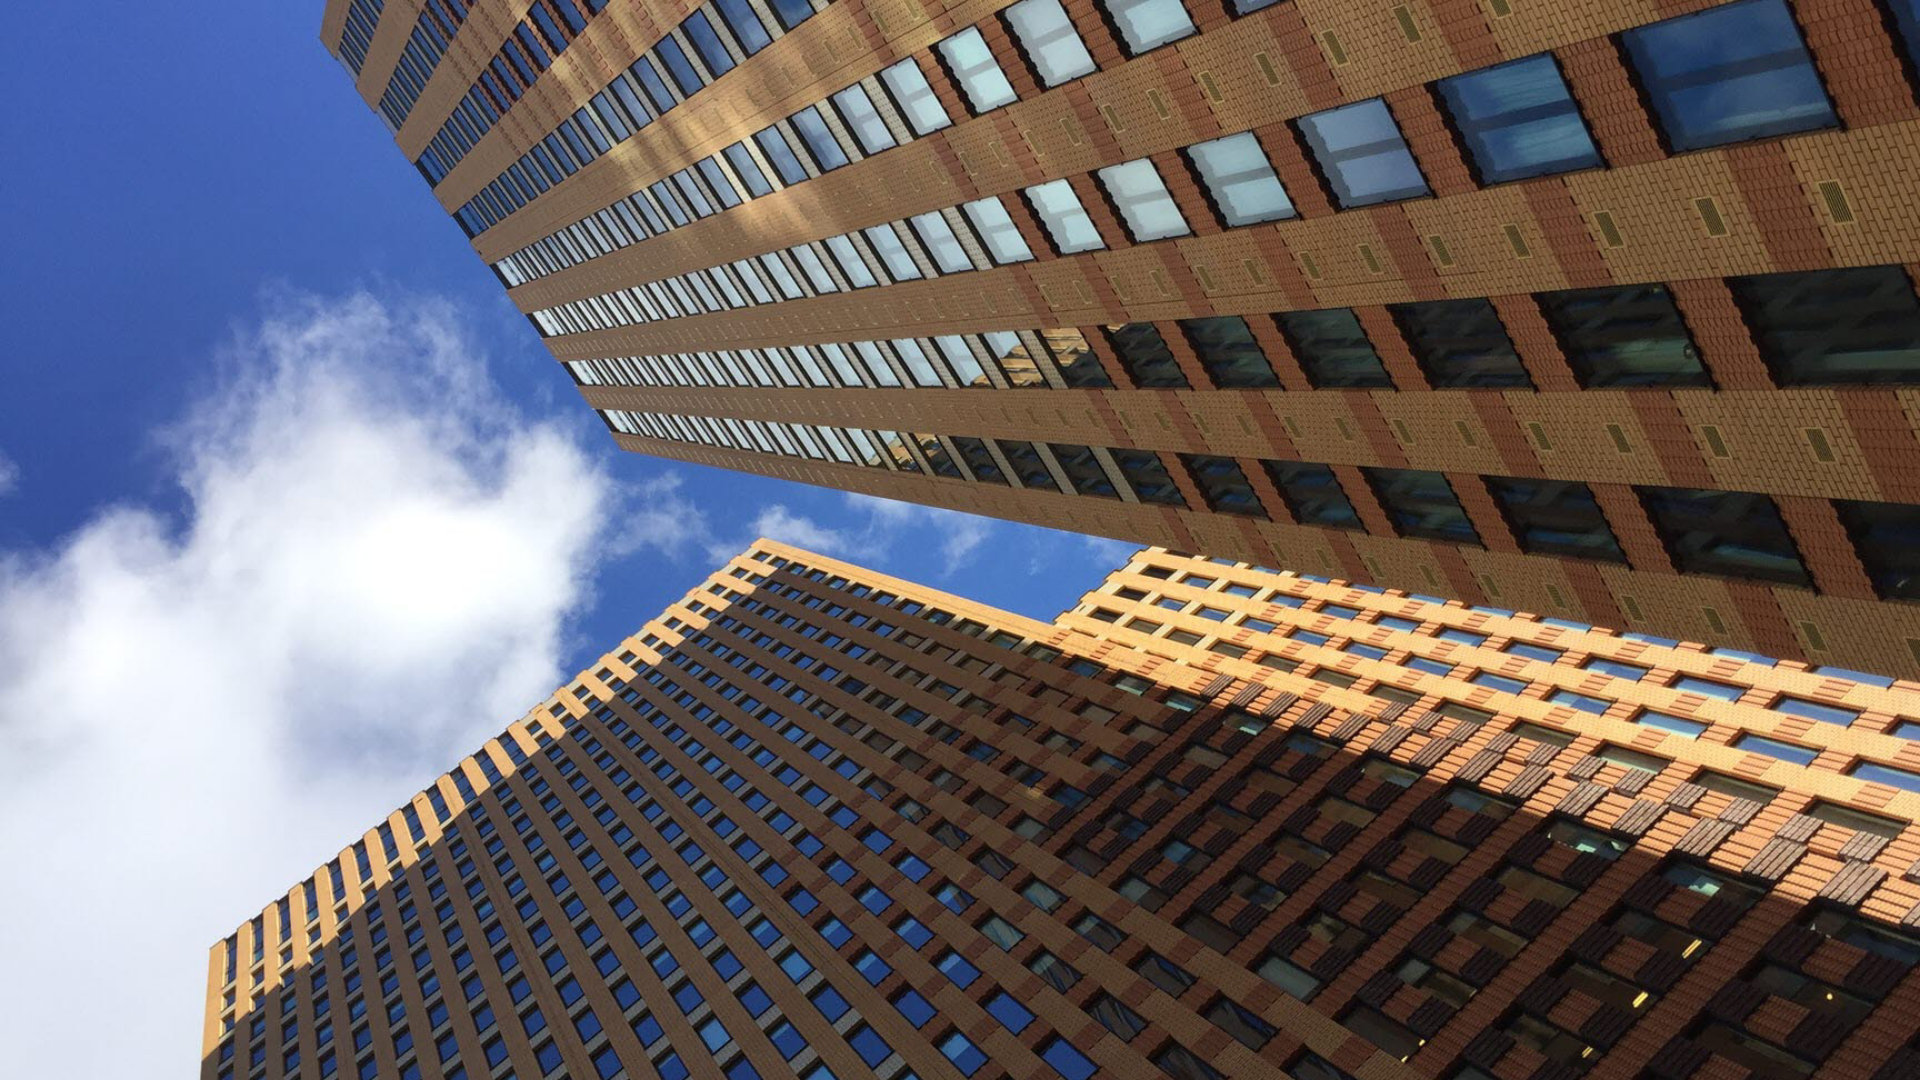 A view of a brick high-rise building taken from a low angle looking up